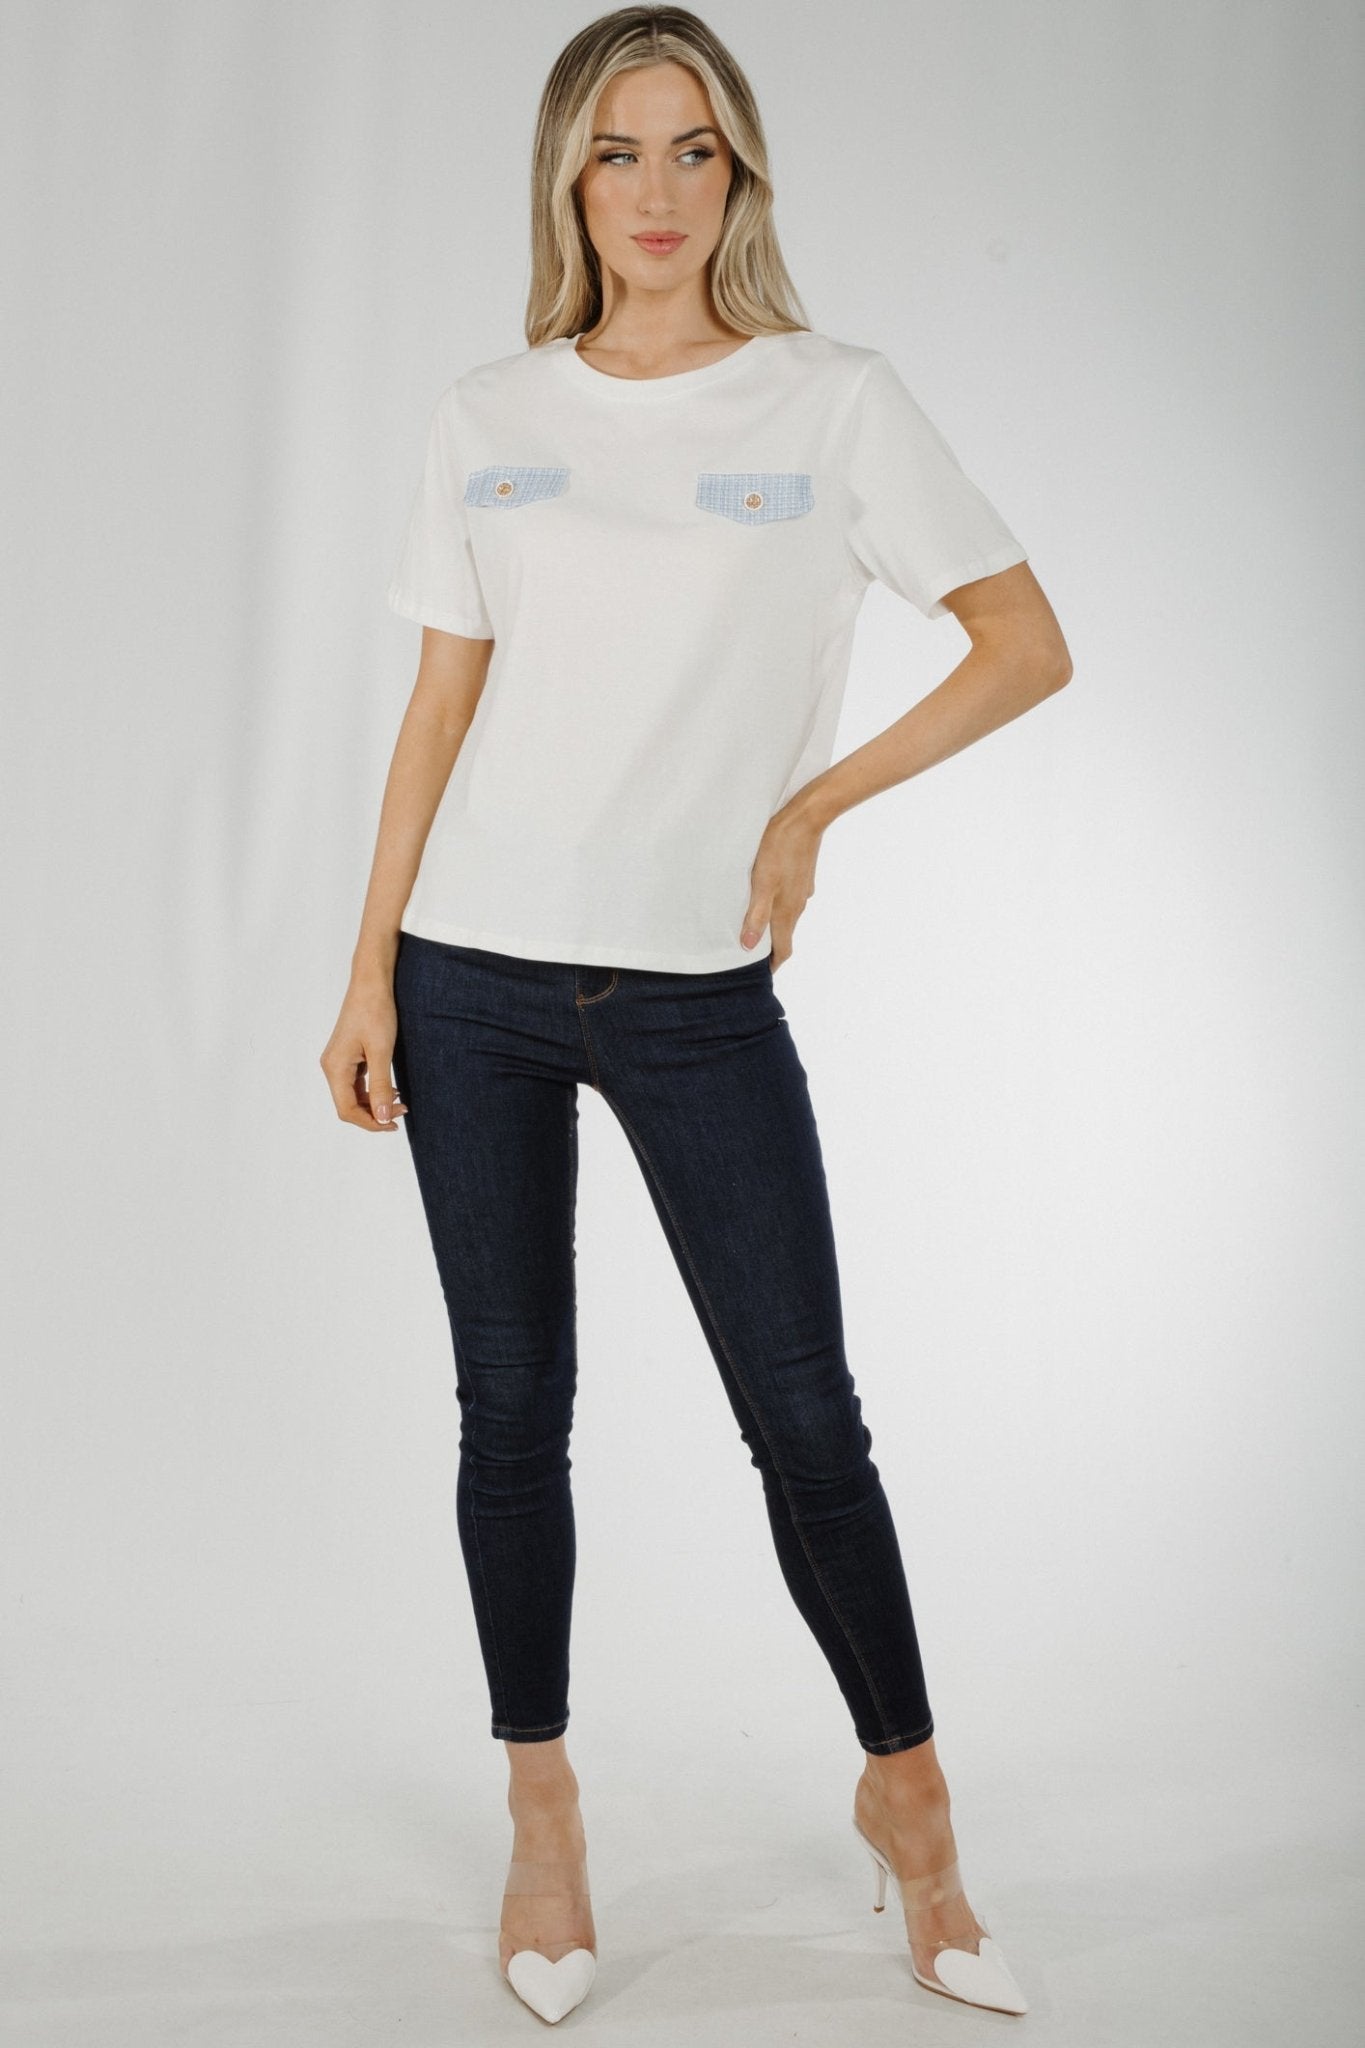 Holly Blue Pocket Detail T-Shirt In White - The Walk in Wardrobe